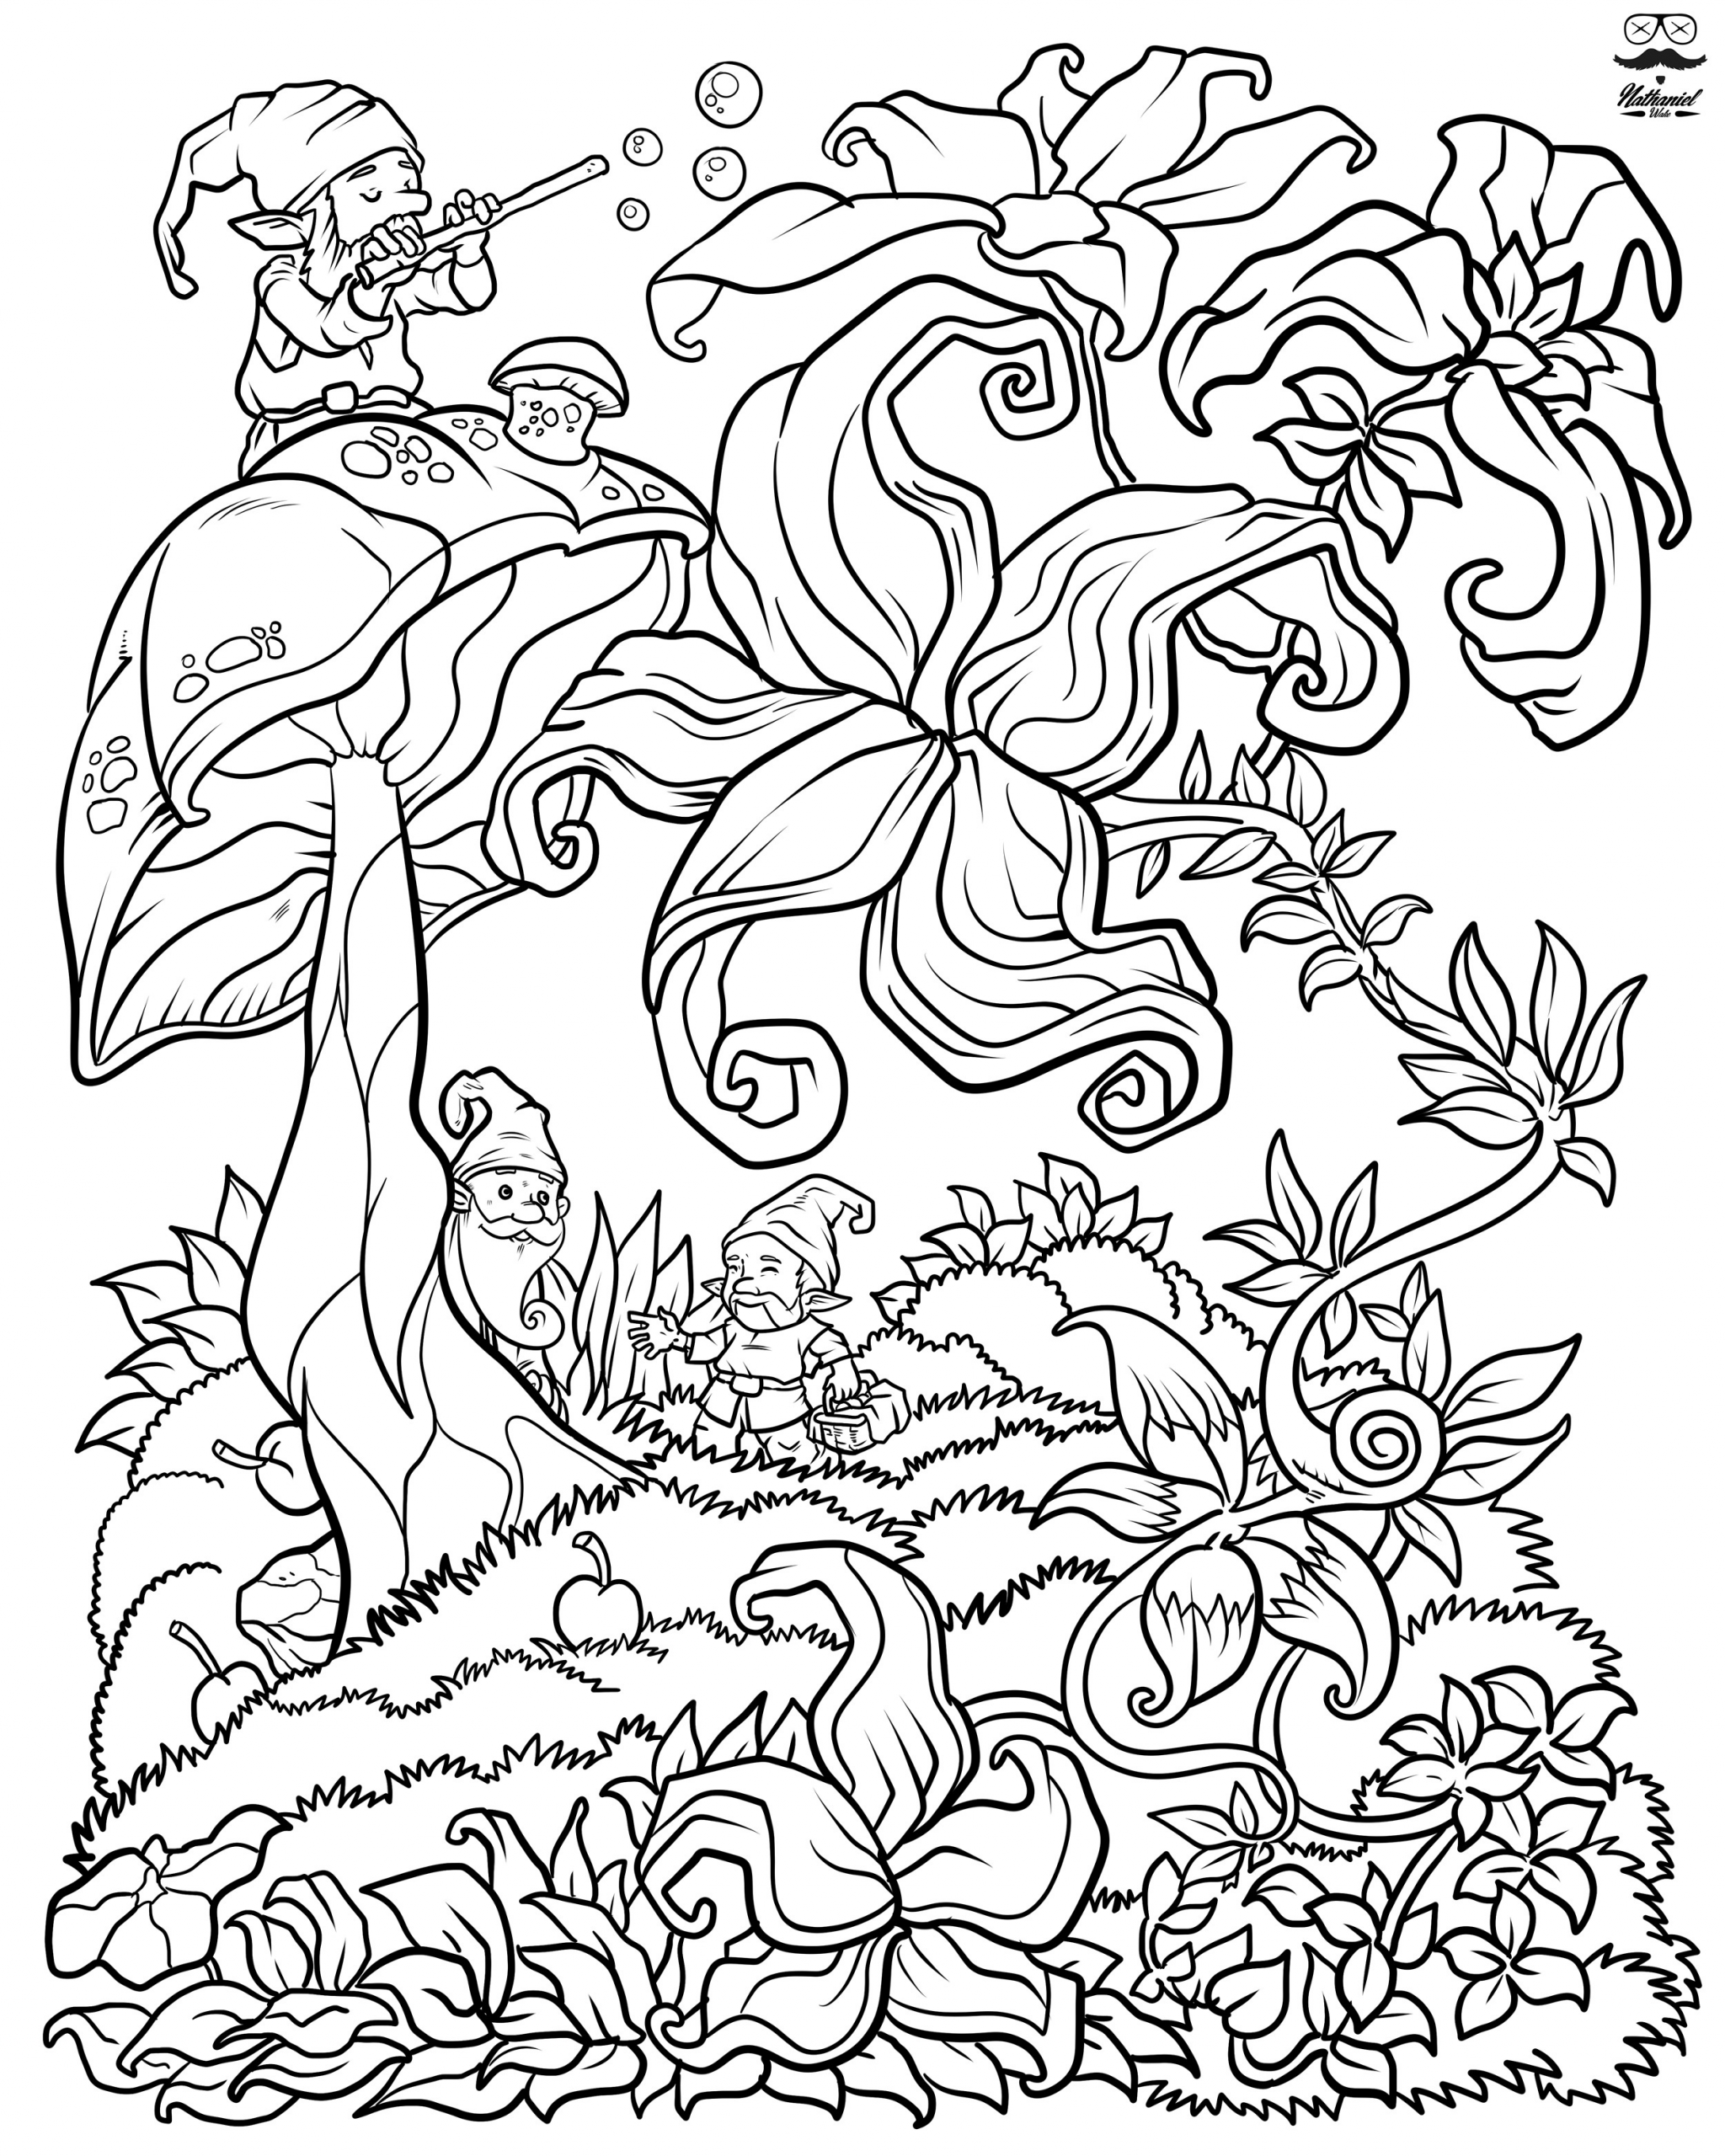 Adult Coloring Pages Free
 Floral Fantasy Digital Version Adult Coloring Book